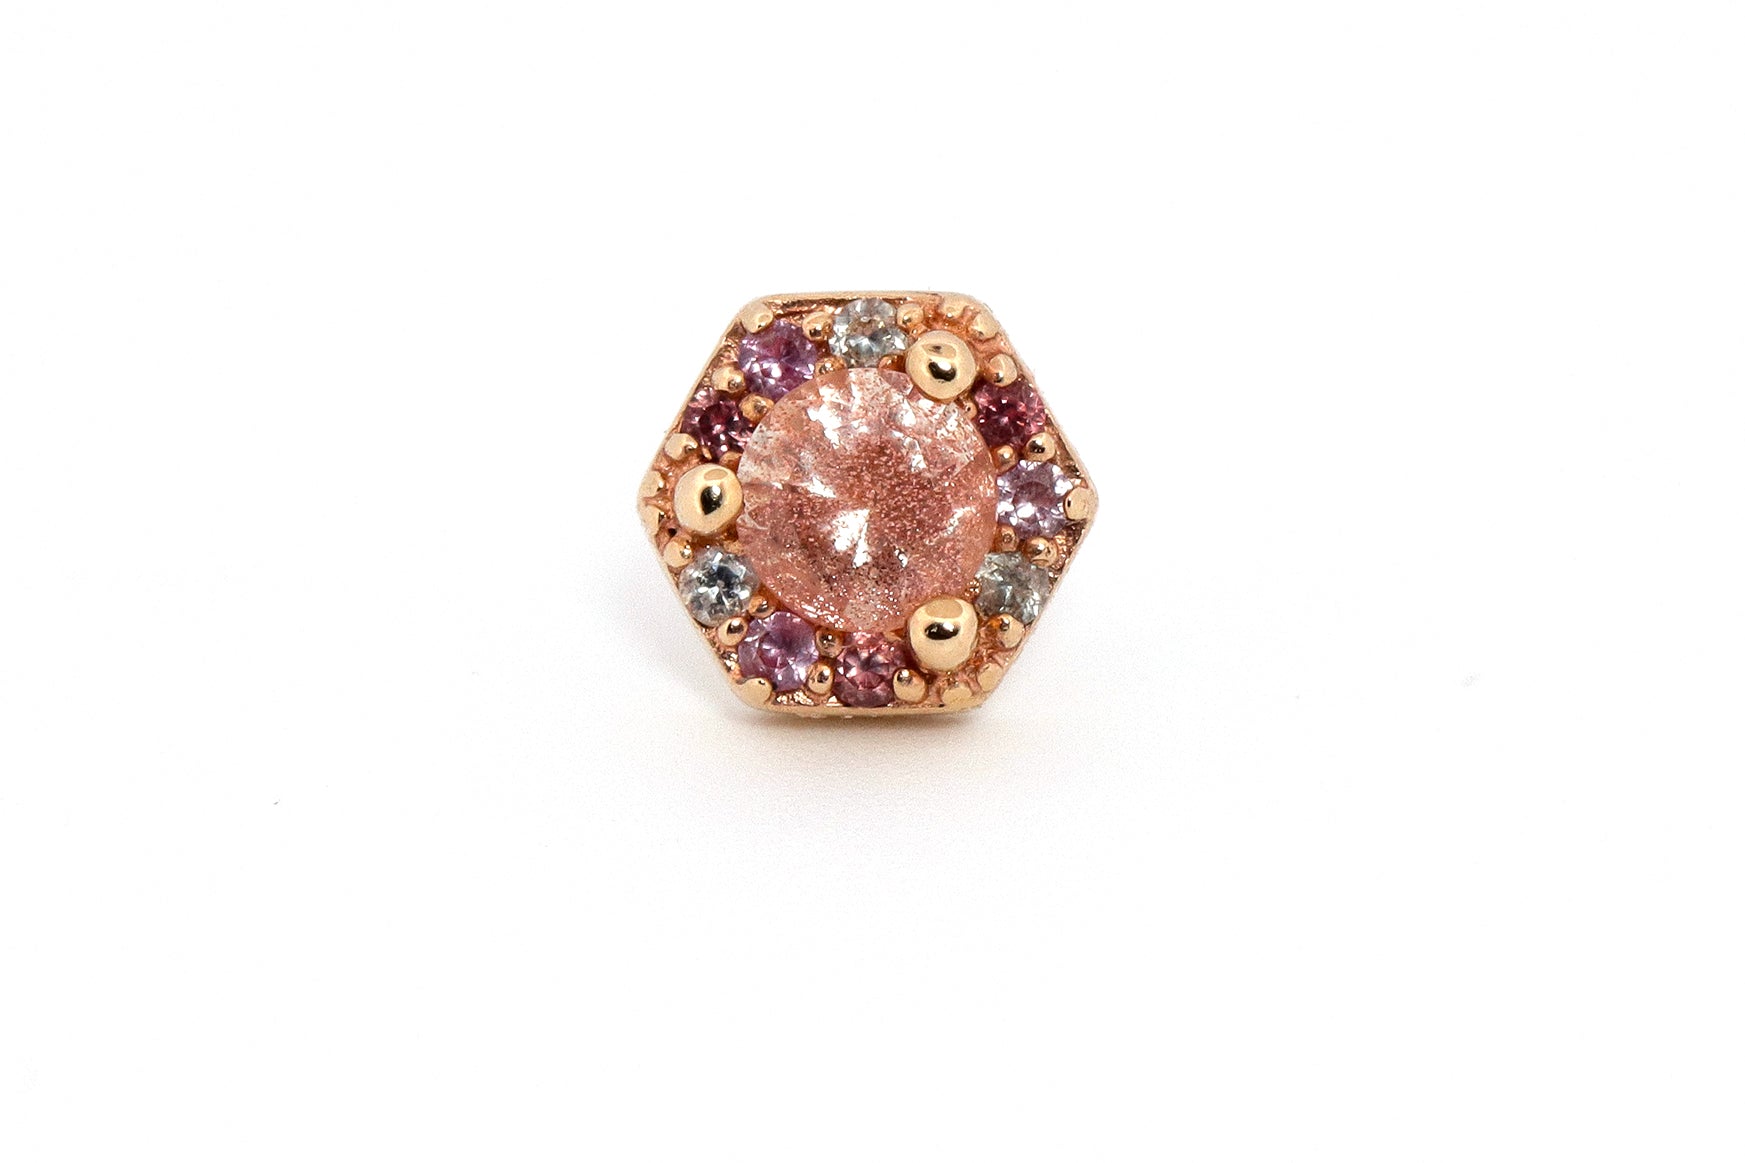 genuine gemstones are set in a solid gold hexagon around a beautiful cut of Oregon Sunstone. Ornamented with an alternating pattern of Pink Sapphire, and Lavender Sapphire